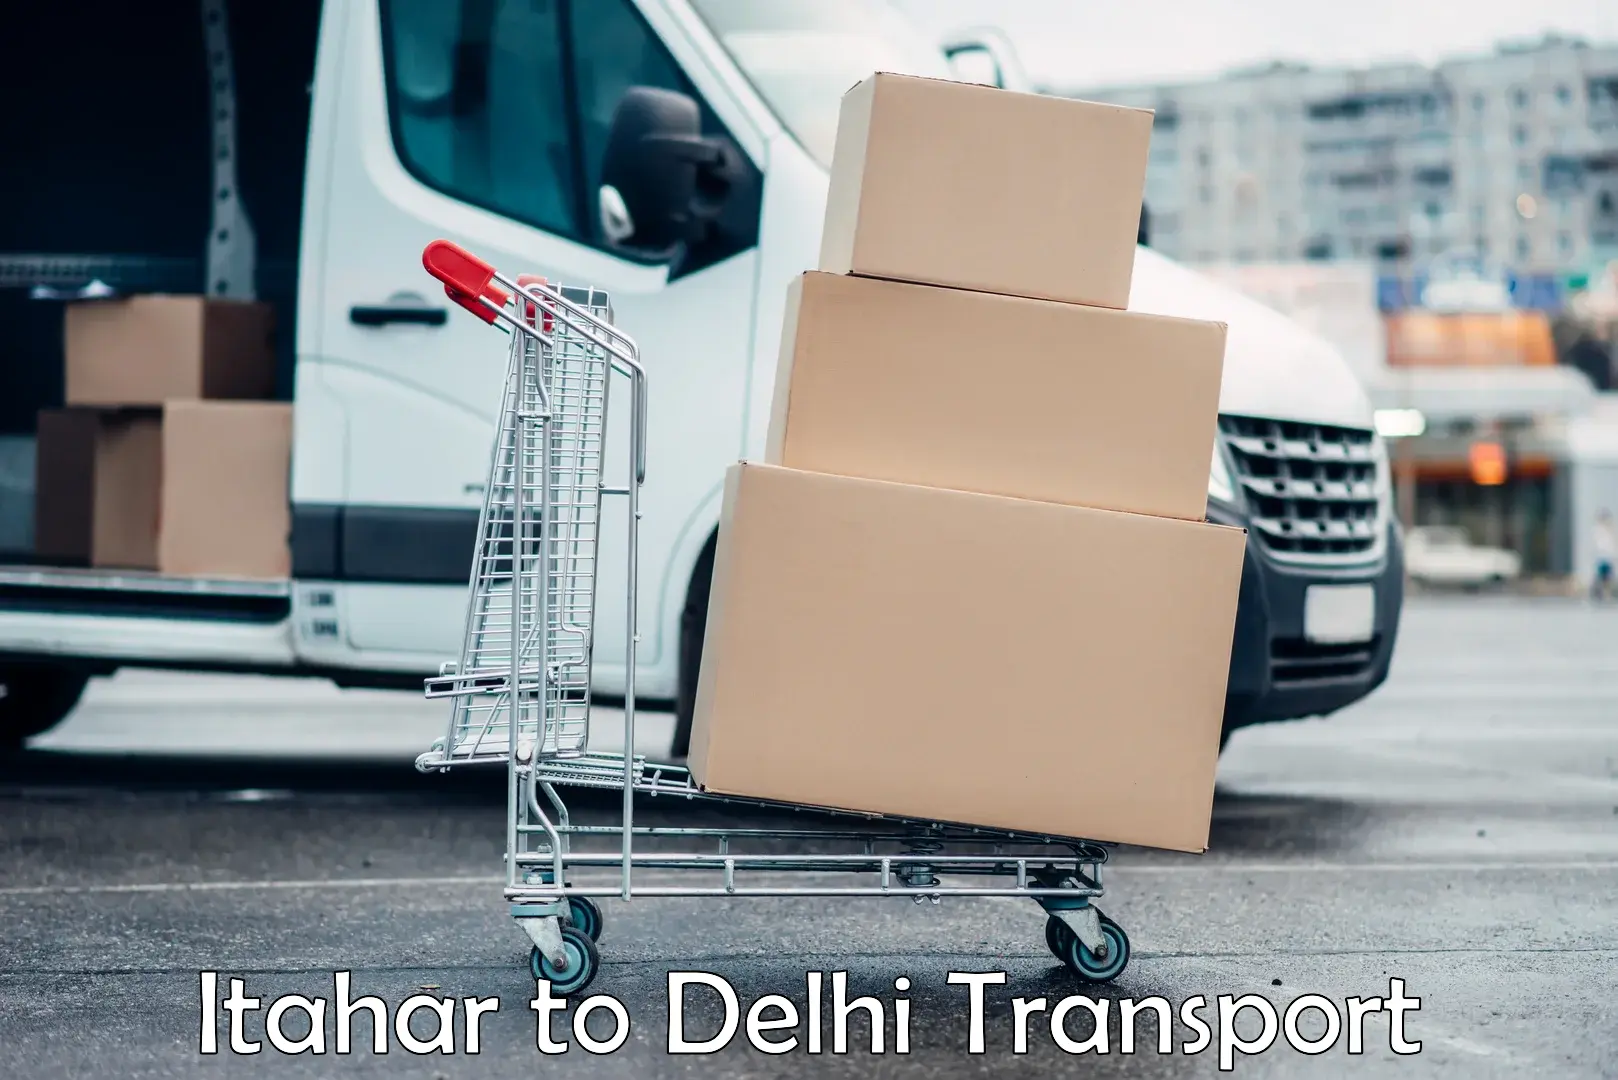 Furniture transport service Itahar to NCR